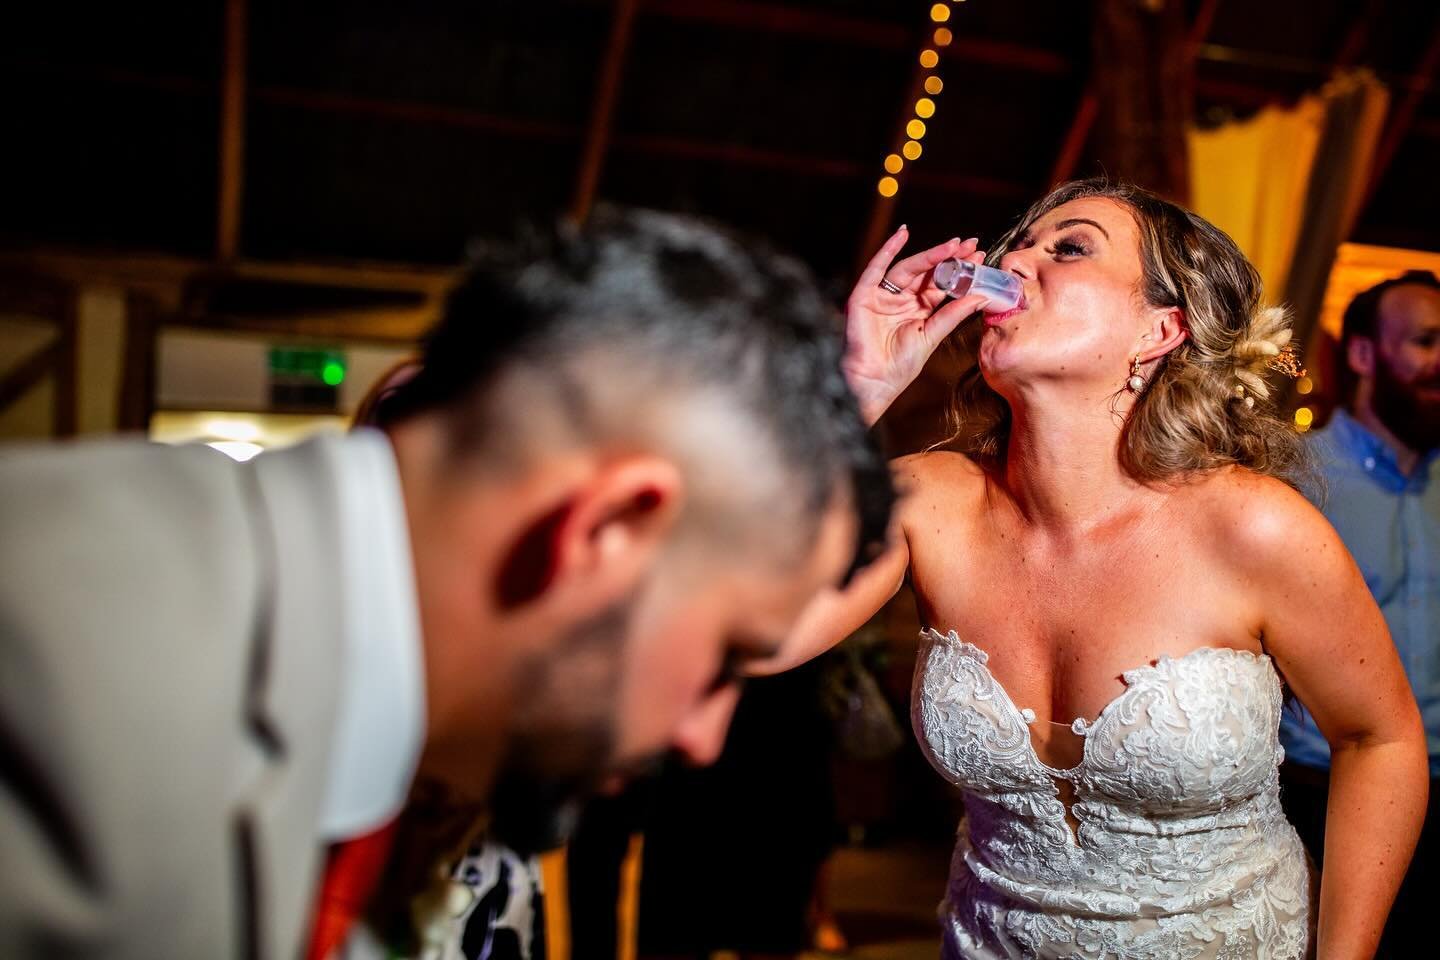 BOOZE

Ahhh the booze. We all love a tipple. We all like to have that snifter to get the juices flowing and make the fun seem that bit more fun. 

But my one tip to those who are getting married&hellip;..have a drink! Go for it. But be careful. It&rs